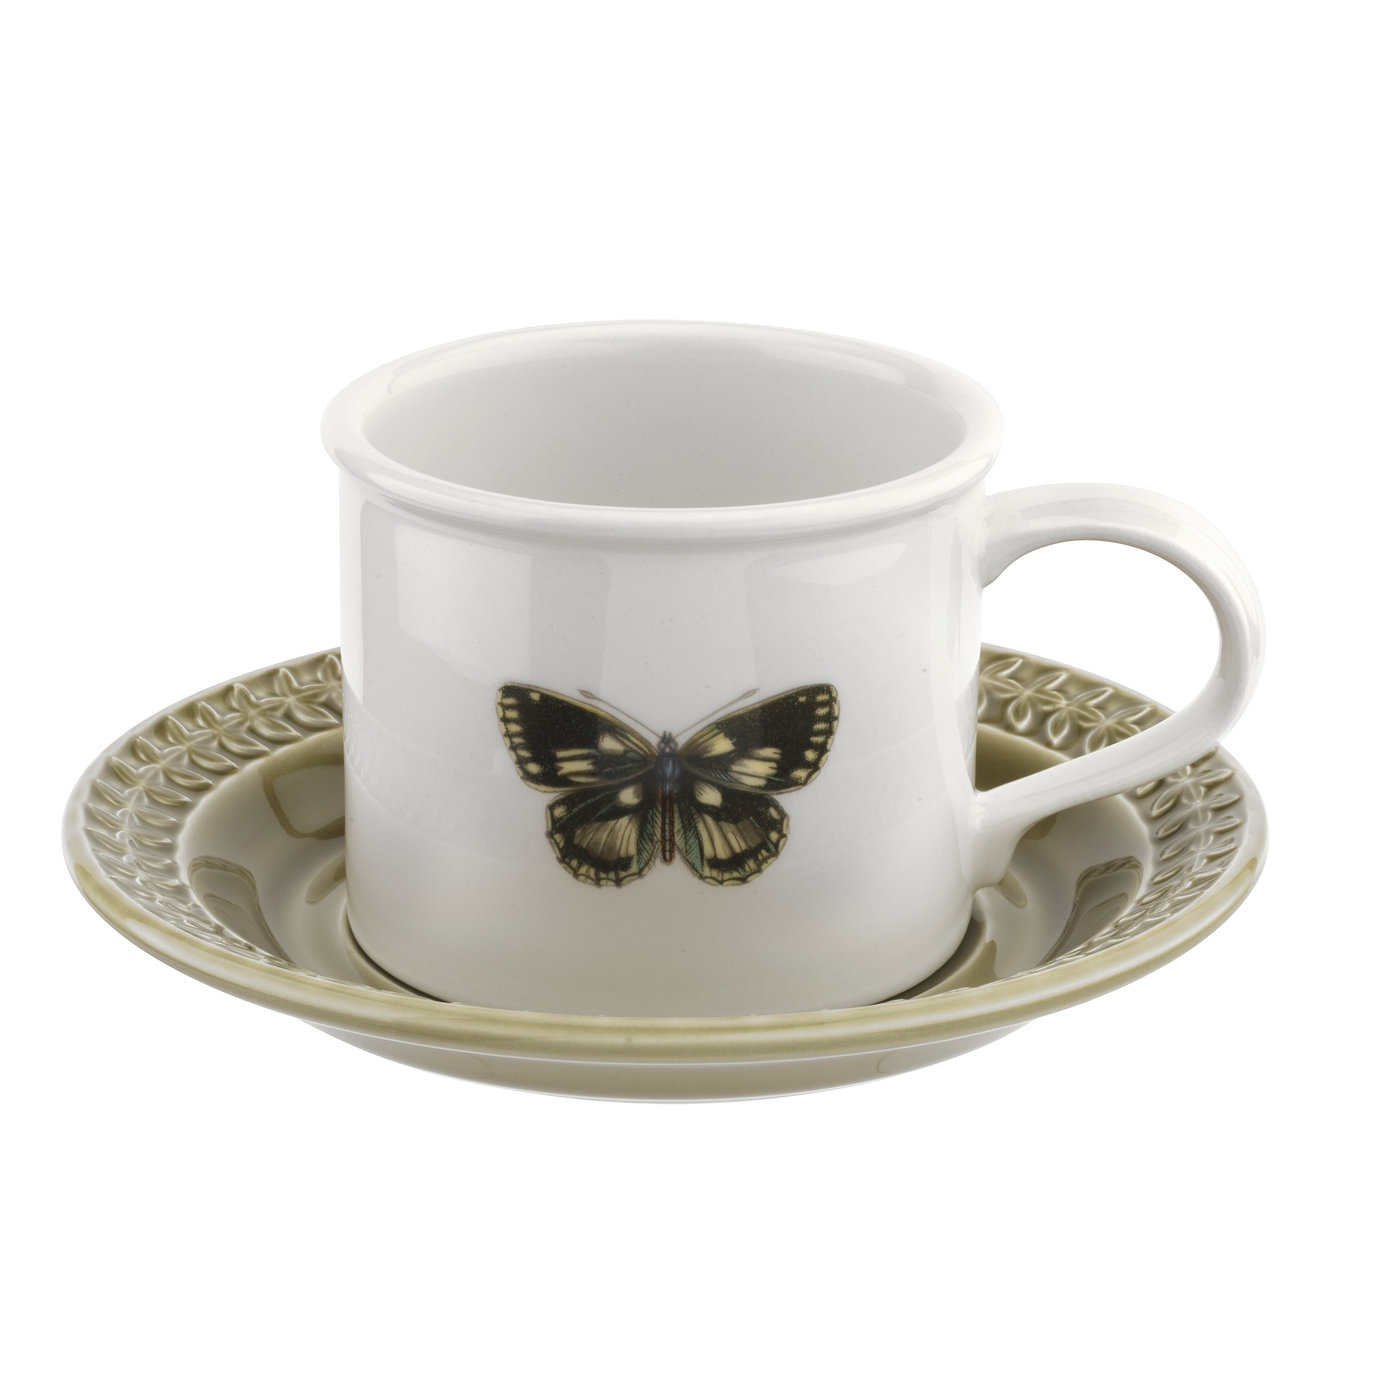 Botanic Garden Harmony Cup & Saucer, Moss image number null